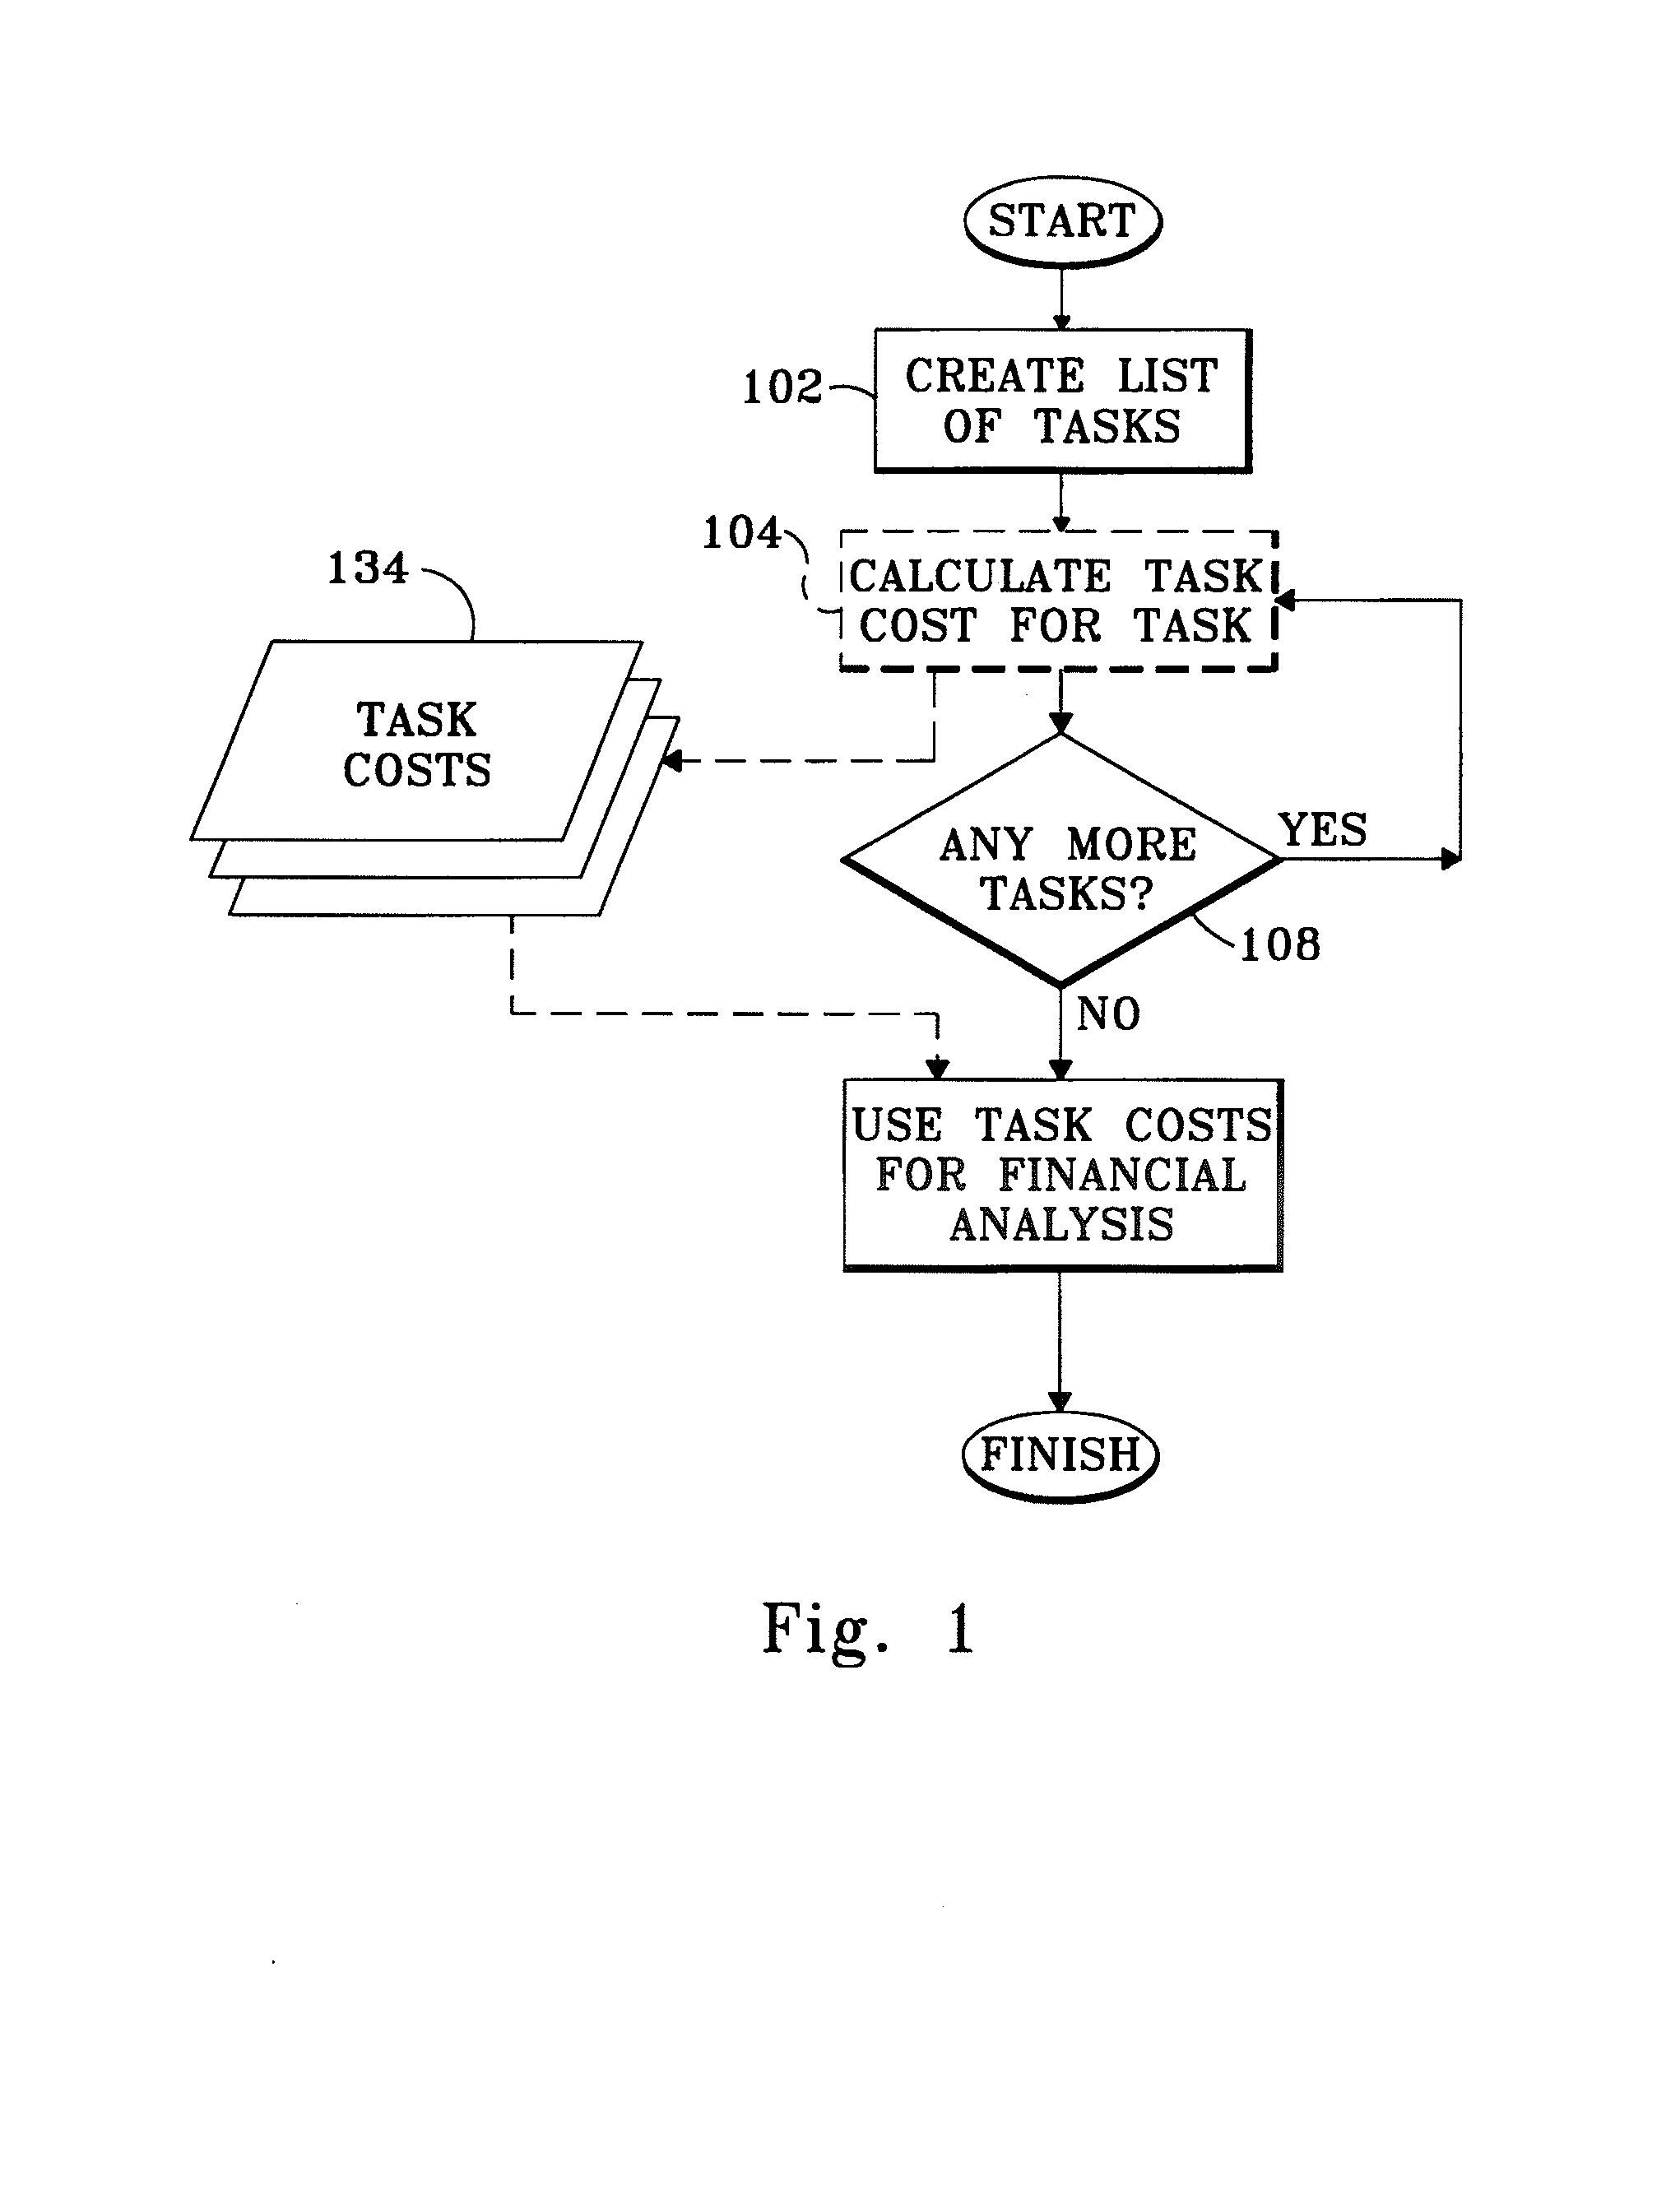 Method of determining task costs for activity based costing models